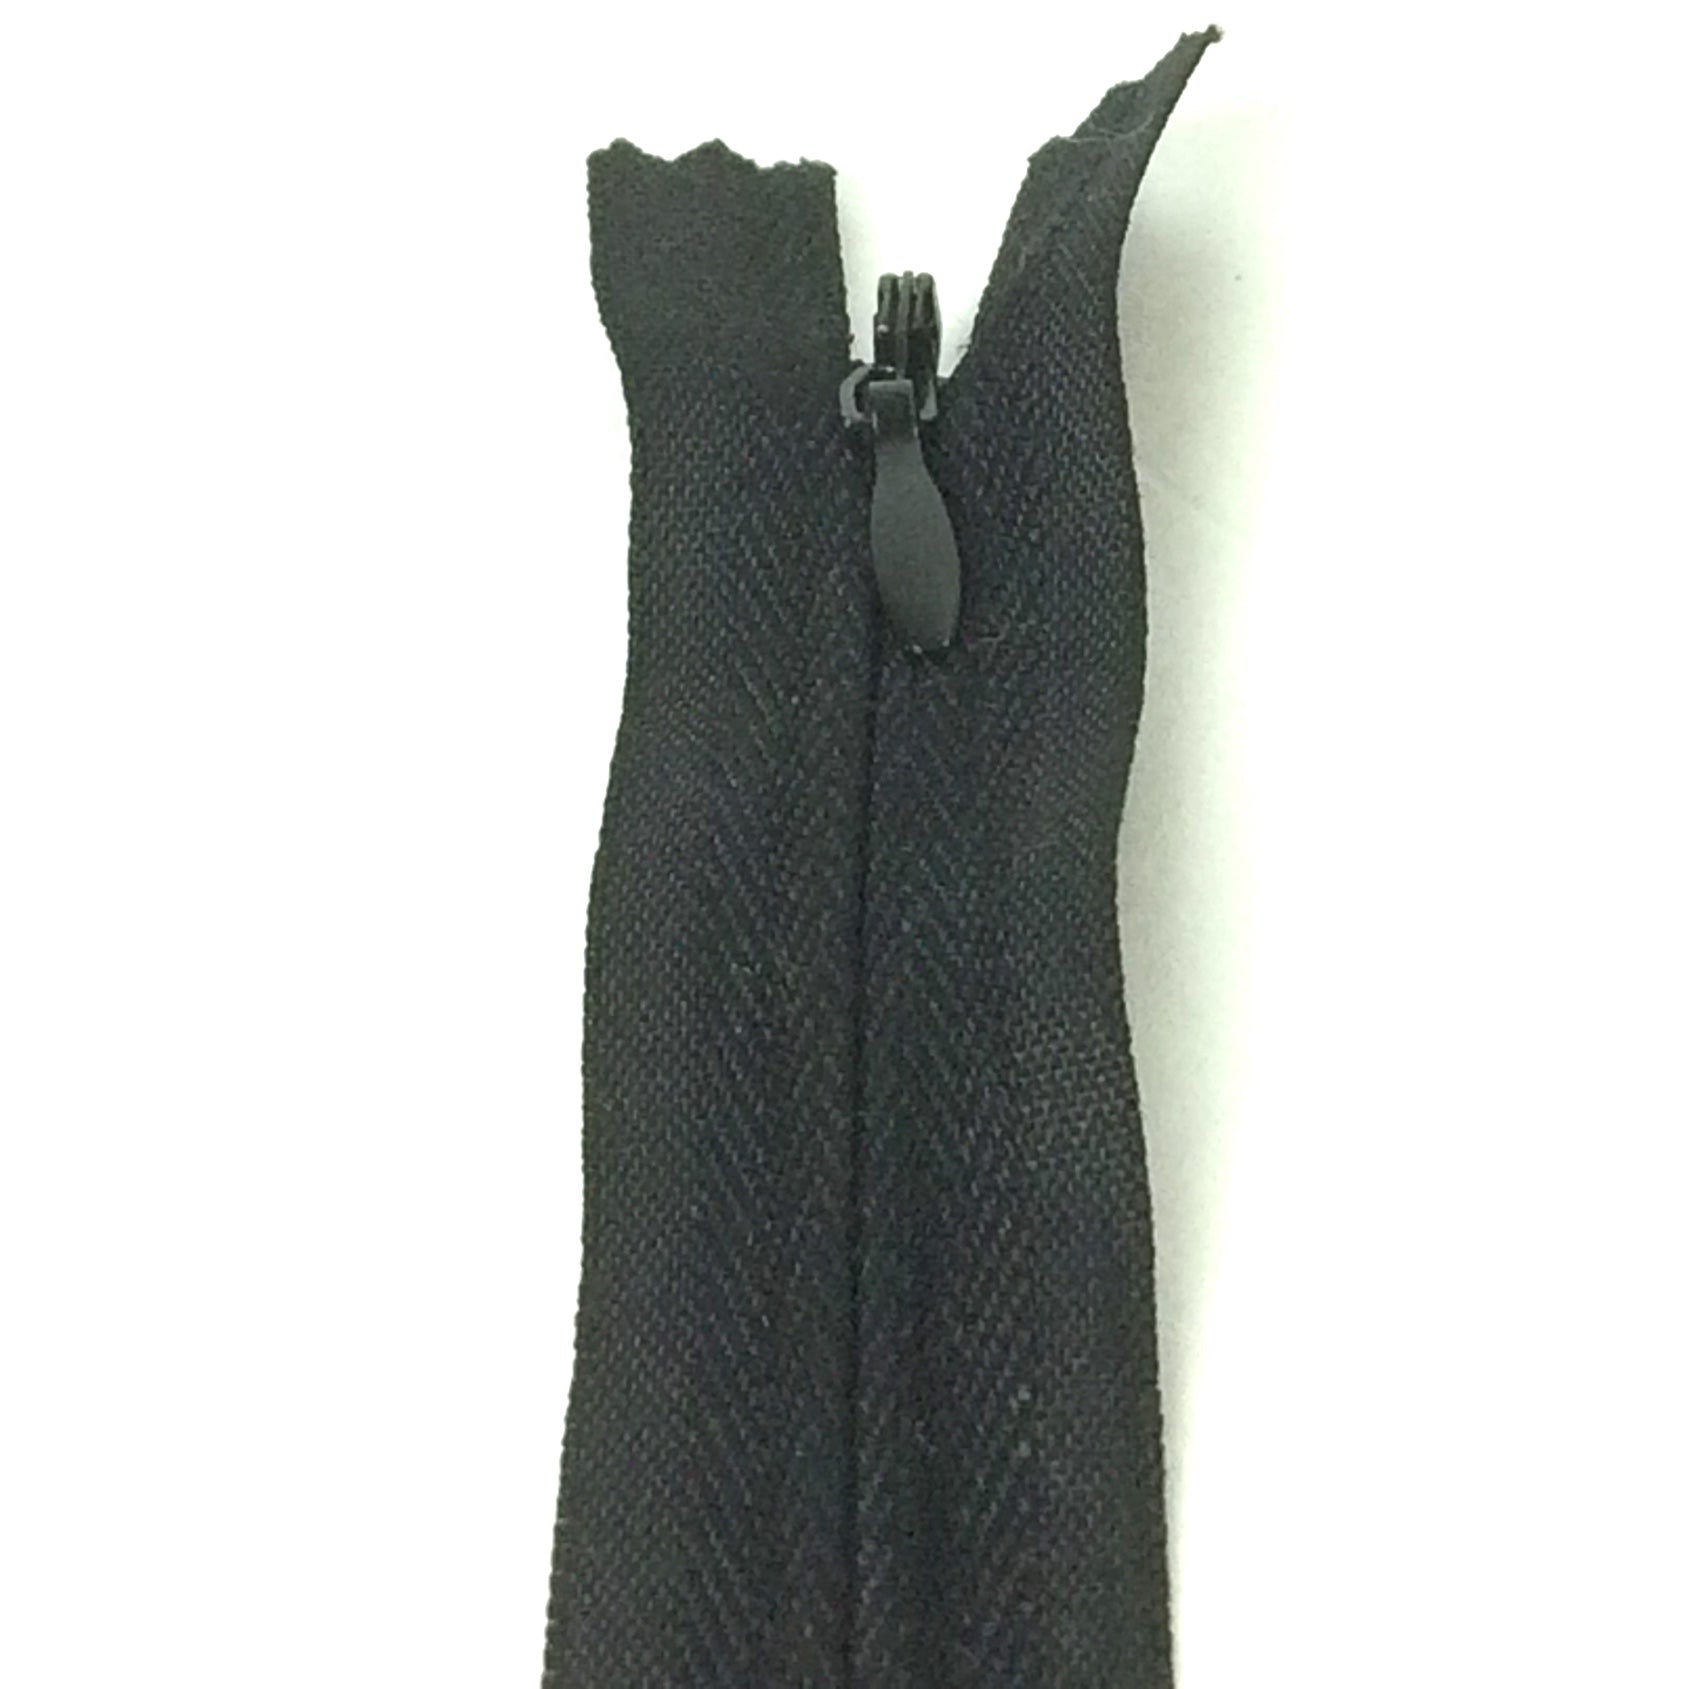 Photo of black invisible or concealed zips available in many different colours and sizes. Great for achieving a professional finish in your products. Invisible zippers are perfect for dressmaking, cushions, crafts, etc., where you don't want your zipper showing. Installing them can be tricky without the right foot on your machine; a normal zipper foot is for installing standard zippers, while you will need an invisible zipper foot for a professional result